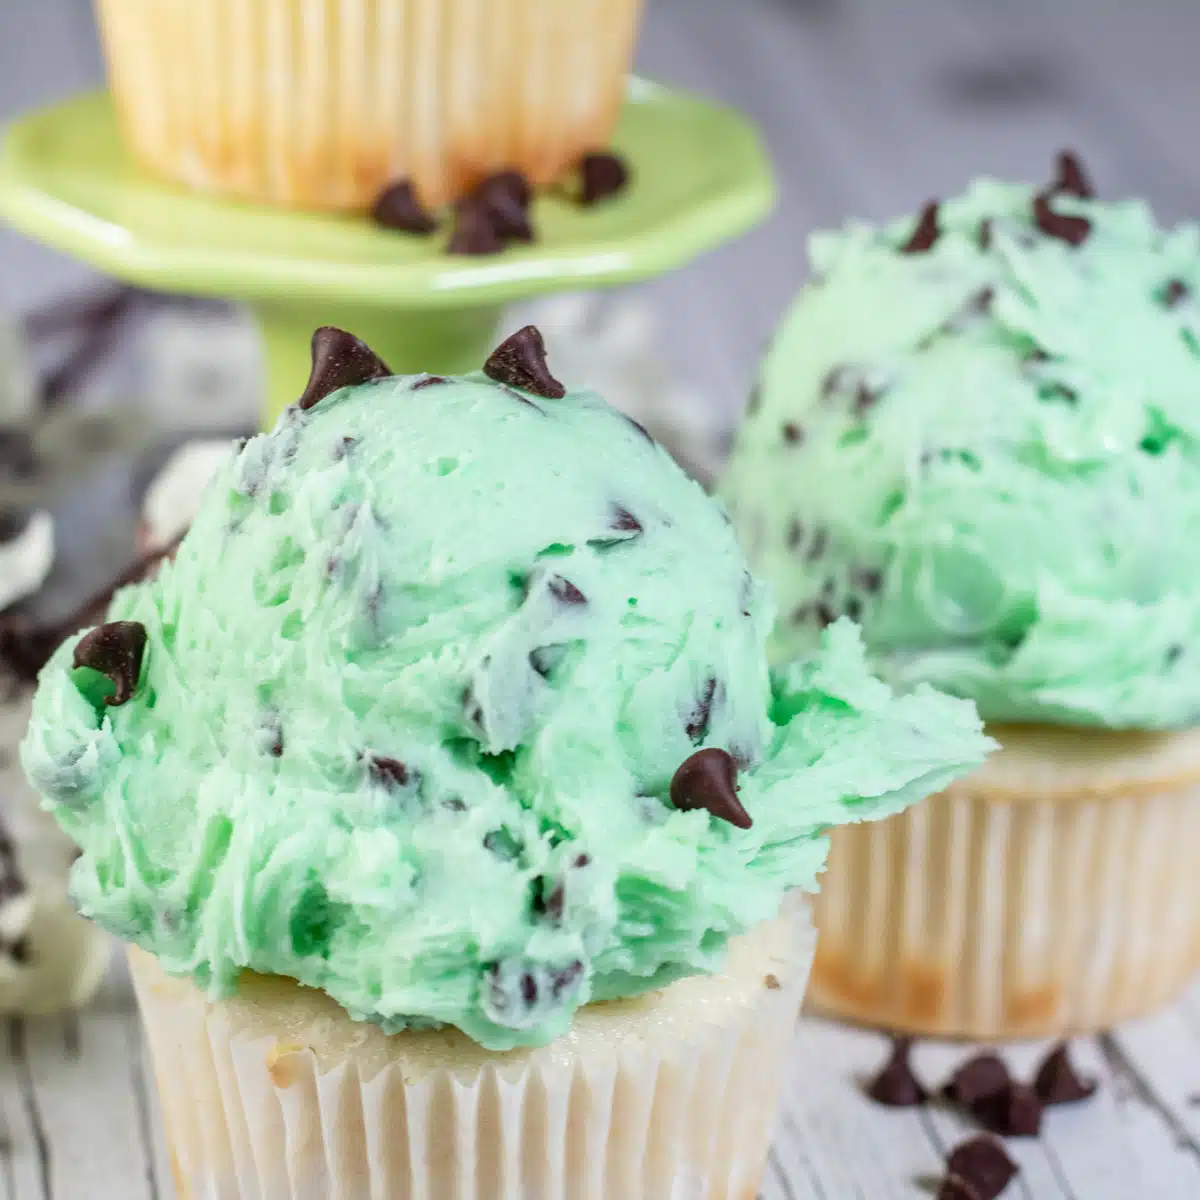 Square image showing mint chocolate chip buttercream frosting on a cupcake.